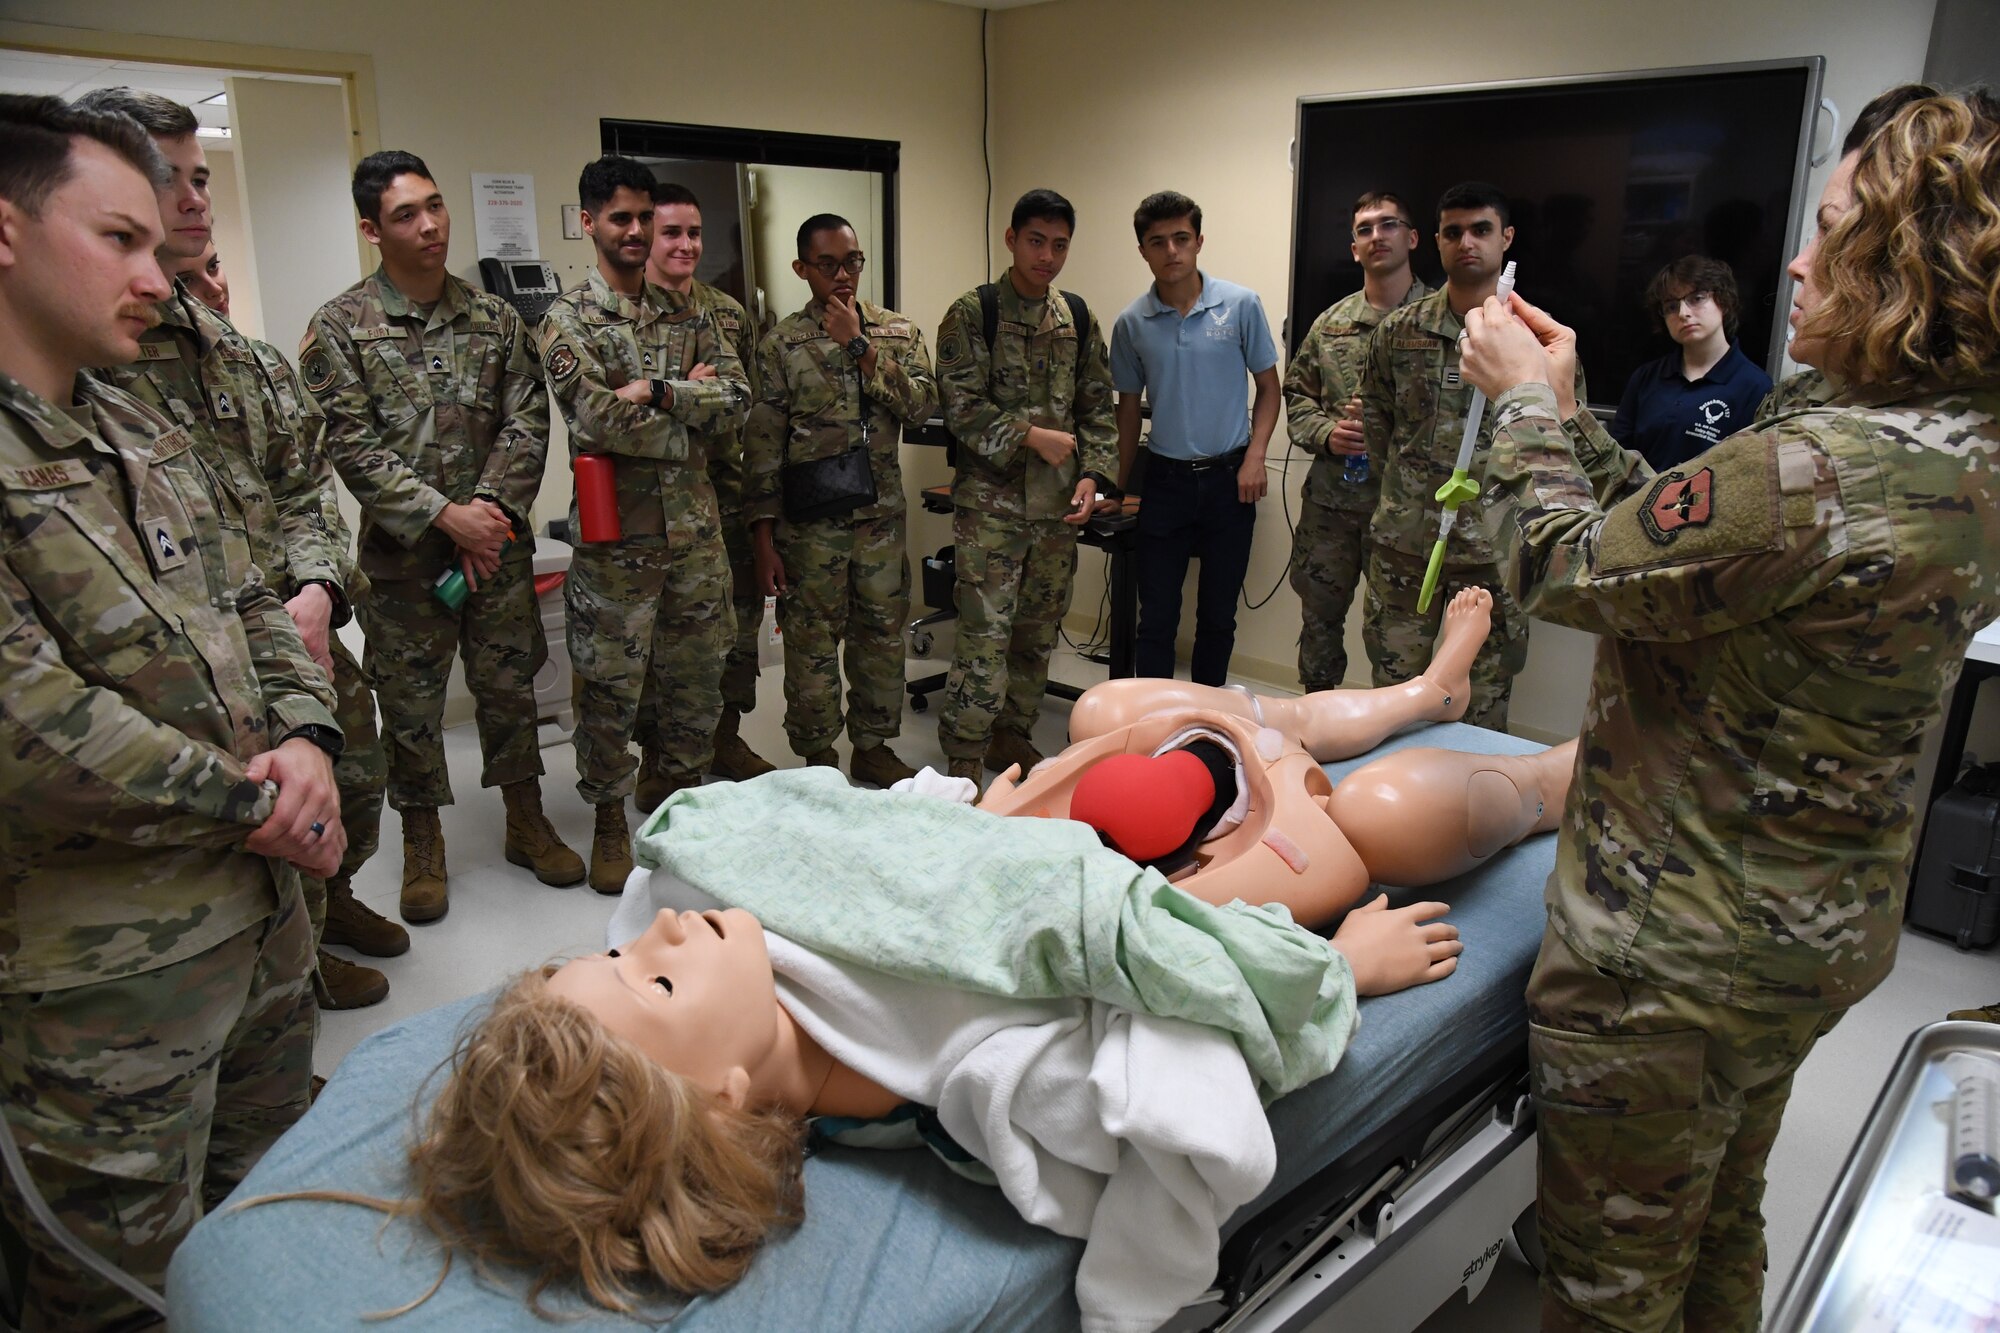 U.S. Air Force 1st Lt. Chantel Davis, 81st Inpatient Operation Squadron clinical nurse, provides a medical procedure demonstration to Air Force ROTC cadets during Pathways to Blue inside the 81st Medical Center at Keesler Air Force Base, Mississippi, March 31, 2023.